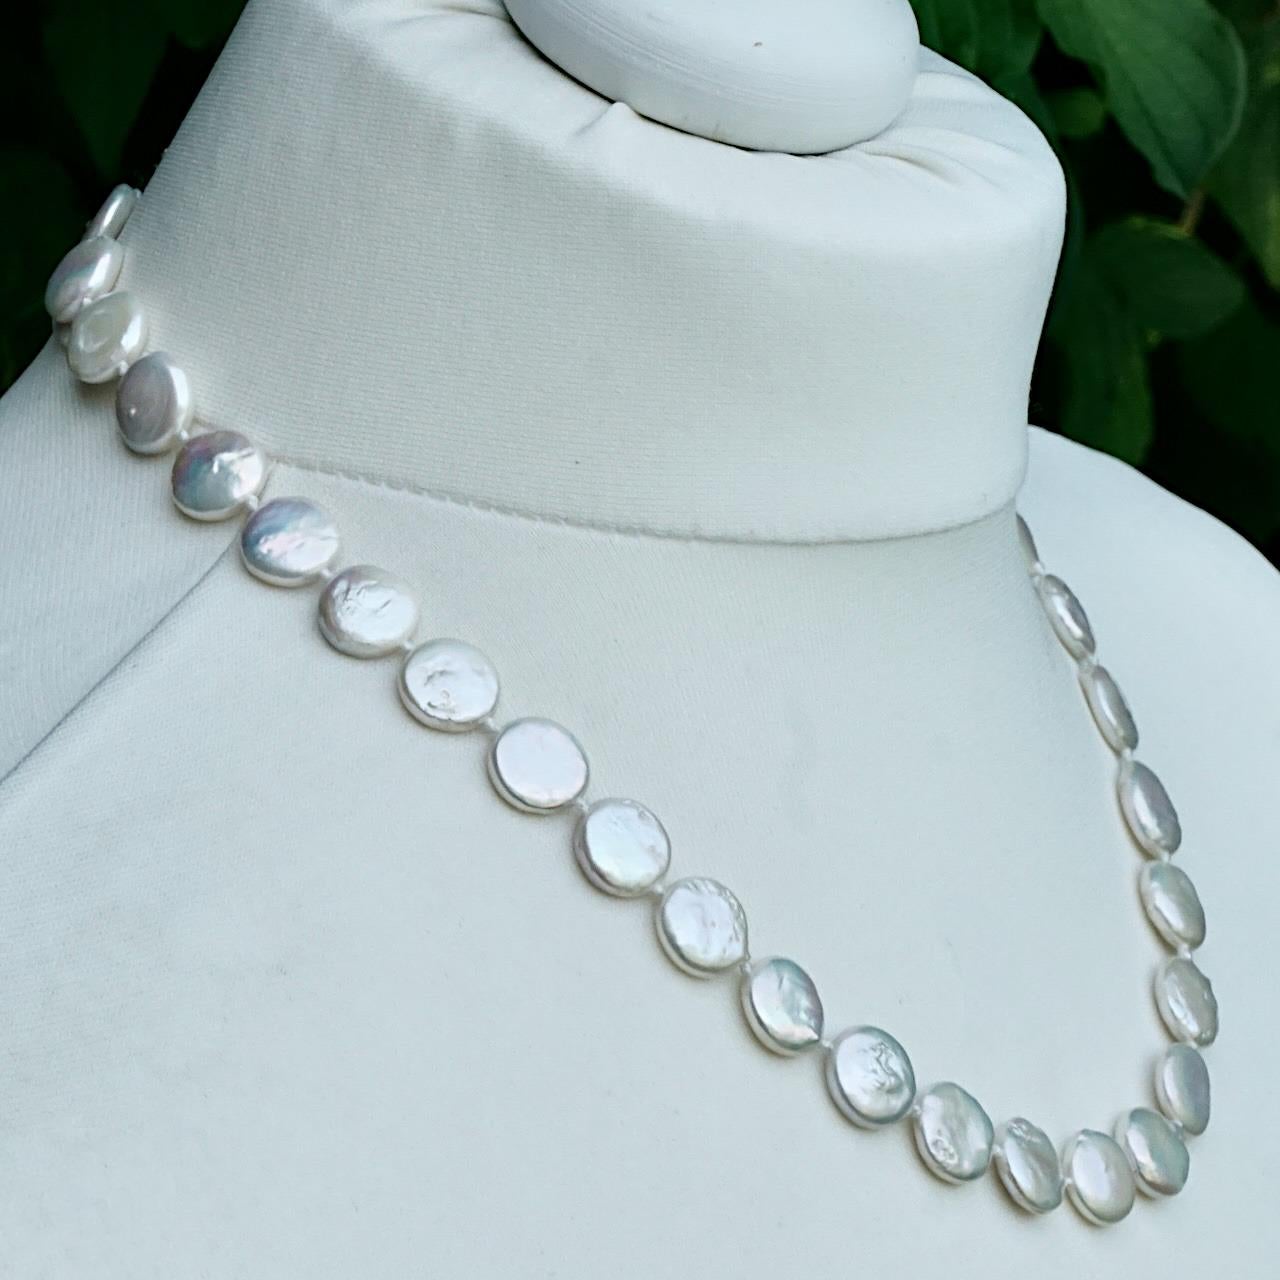 Lovely freshwater coin pearl necklace with a wonderful iridescent lustre. The necklace is knotted between each pearl. Measuring length 52.5 cm / 20.6 inches, and the pearls are 1.3 cm.

This beautiful and classic coin pearl necklace would be perfect